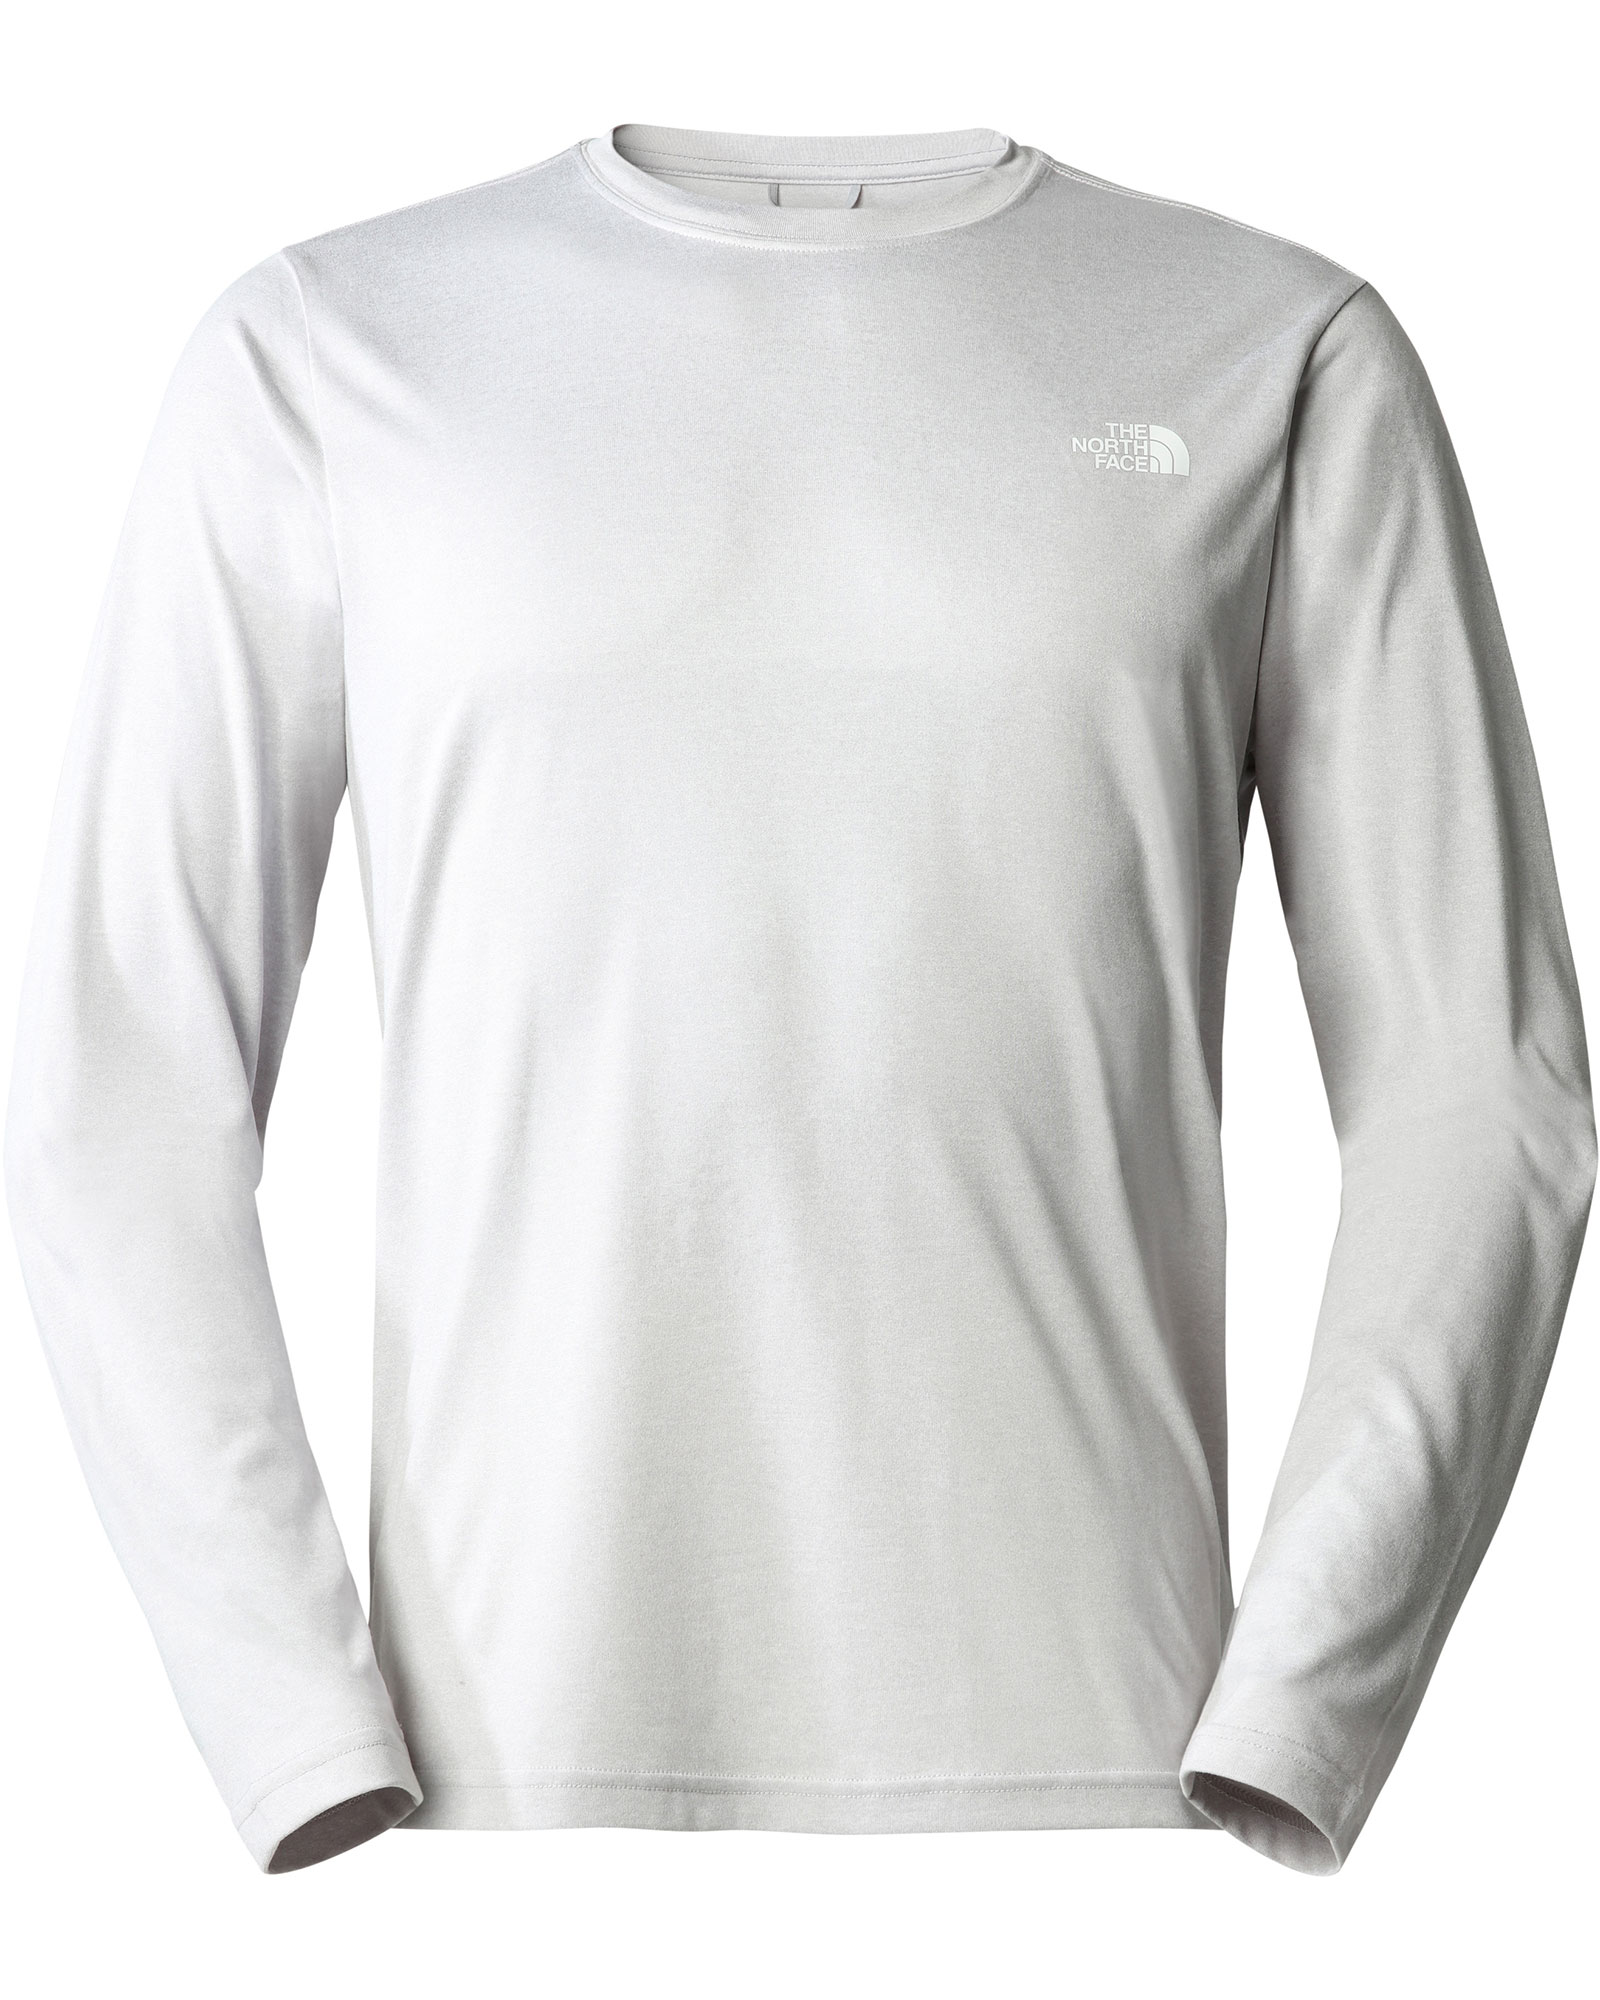 The North Face Mens Reaxion Amp Long Sleeved Crew T-shirt